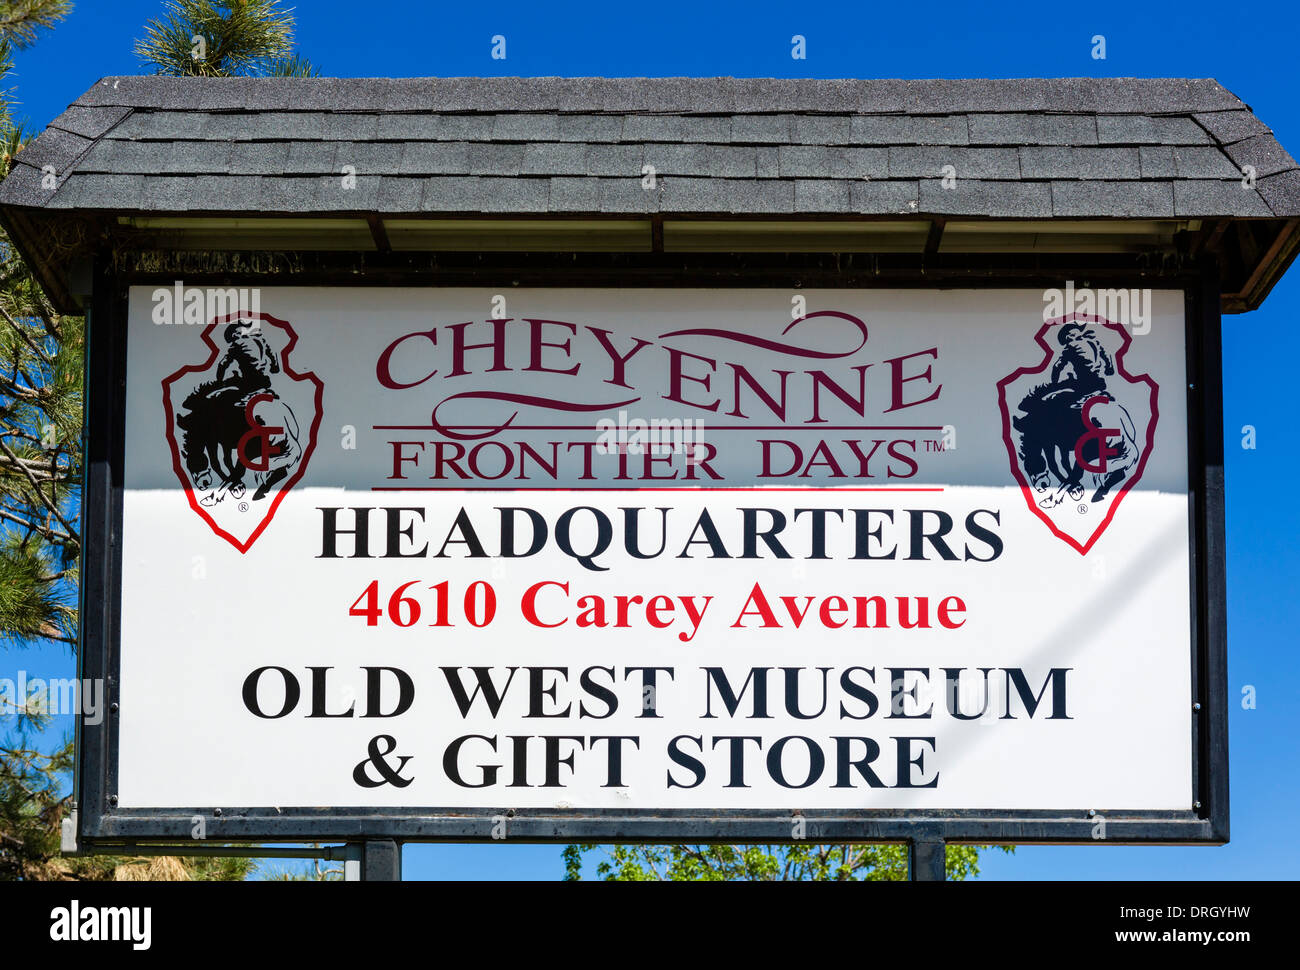 Sign outside the museum and headquarters of Cheyenne Frontier Days, Carey Avenue, Cheyenne, Wyoming, USA Stock Photo